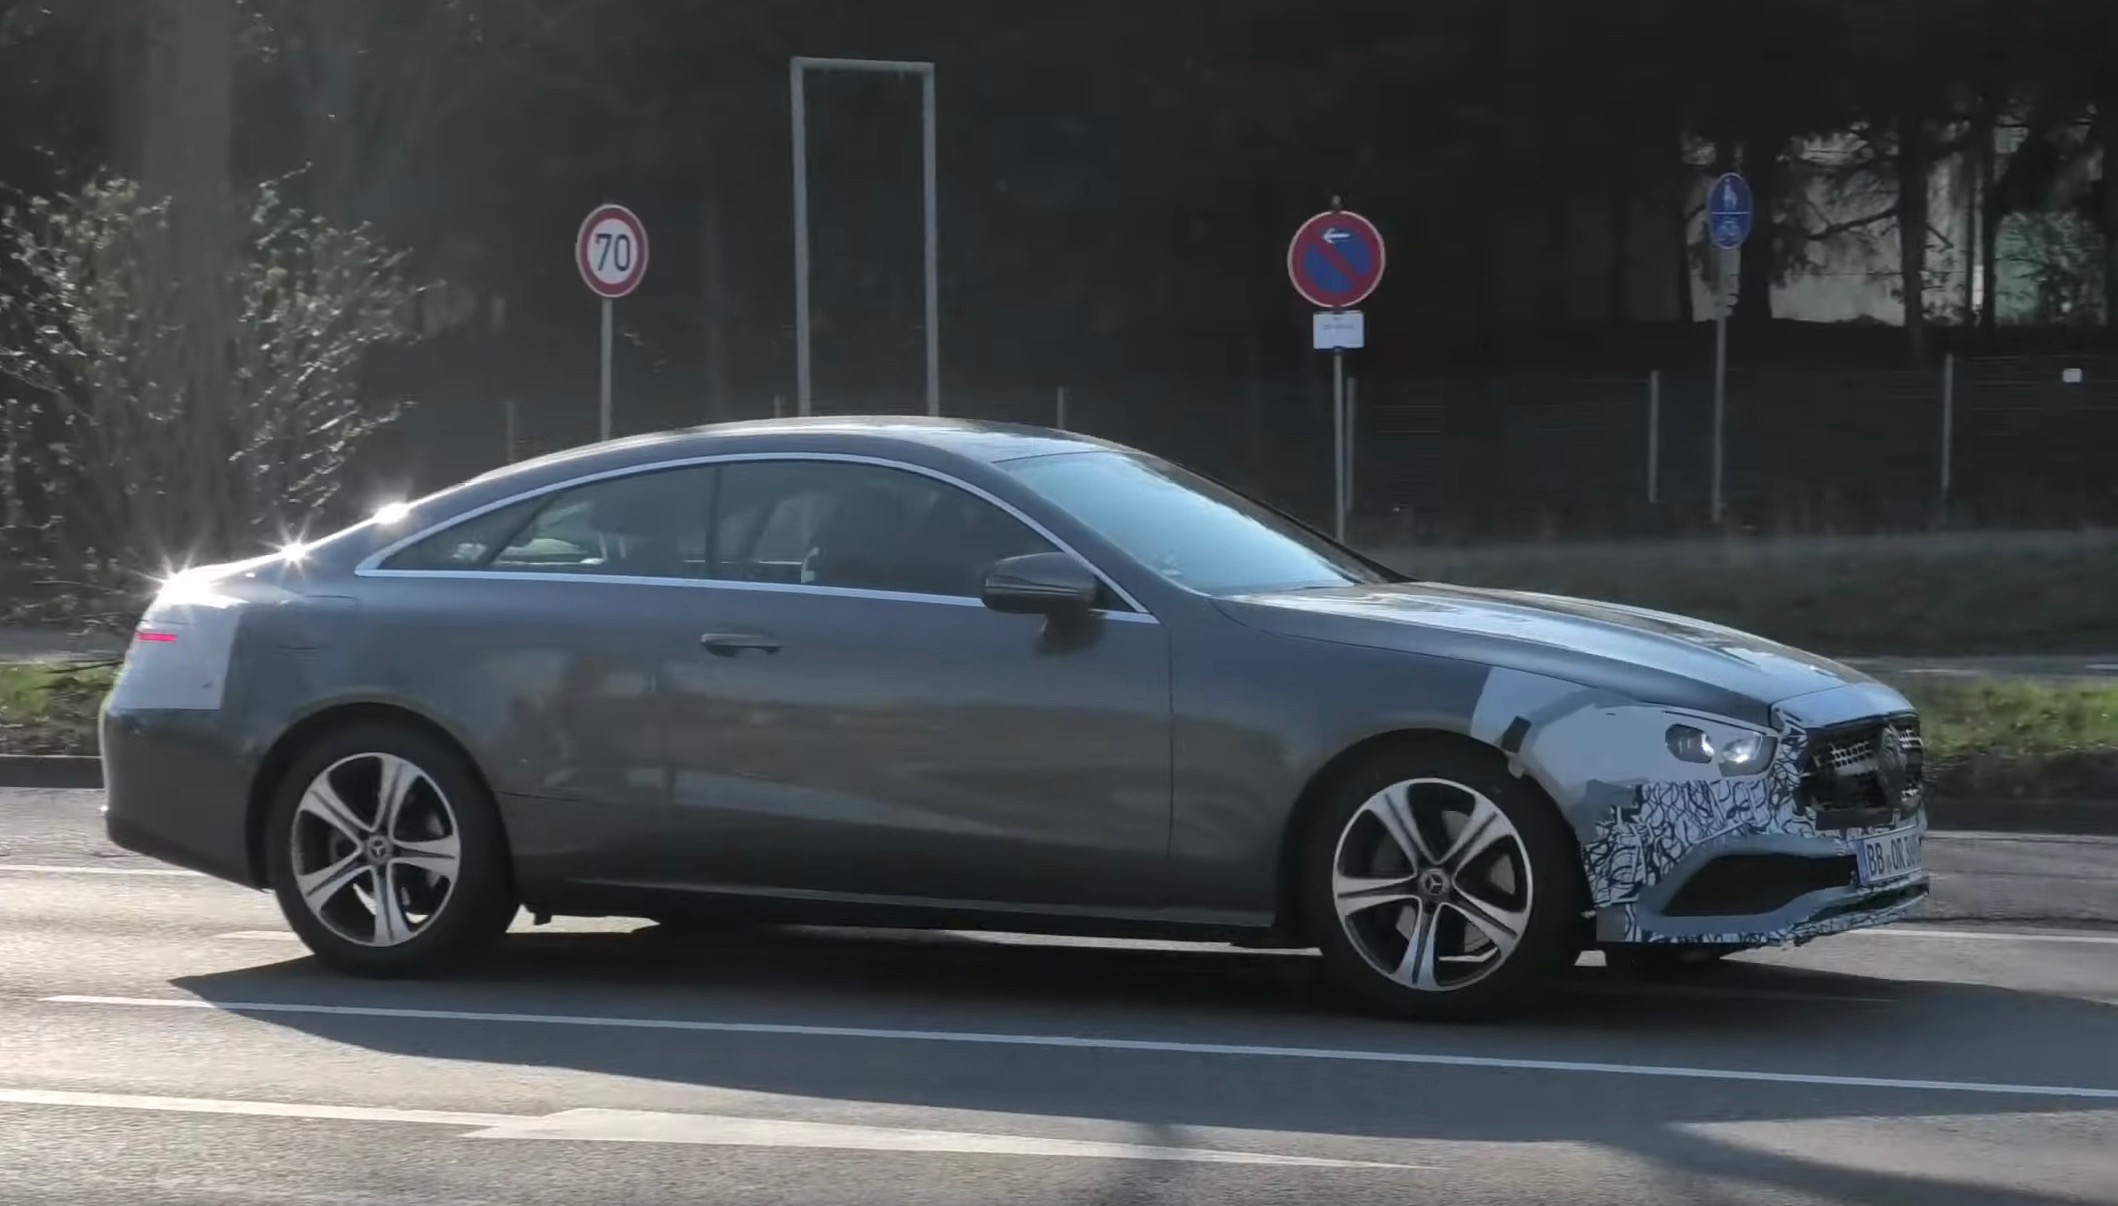 2021 Mercedes-Benz E-Class coupe spotted, new-look face (video)